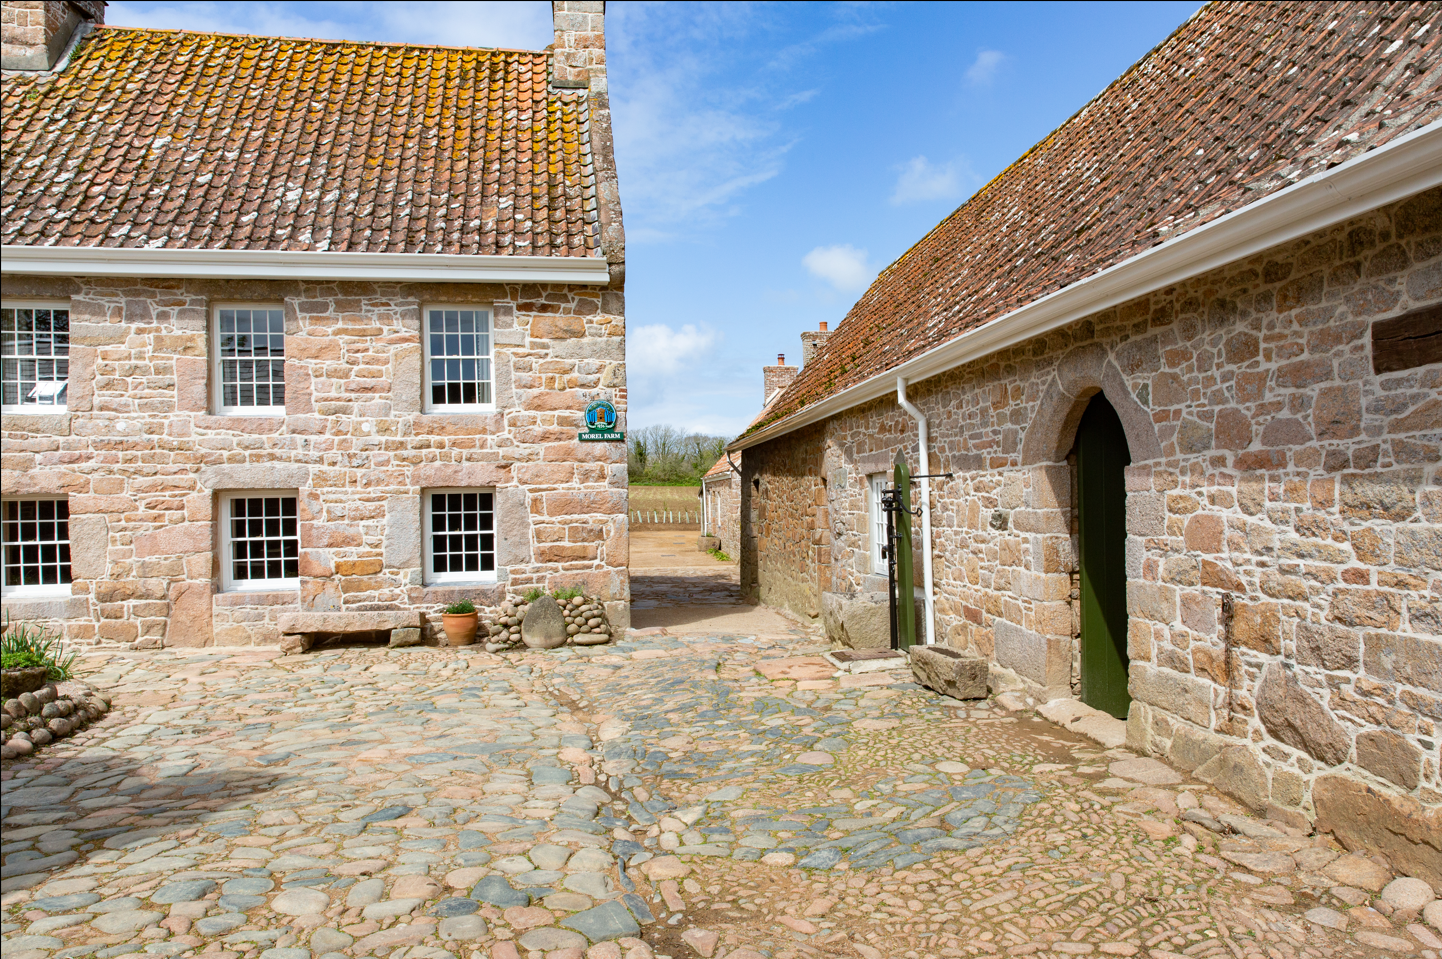 Courtyard - The Farmhouse is front and the Pressoir to the right.  The Bakehouse is in the distance on the right.